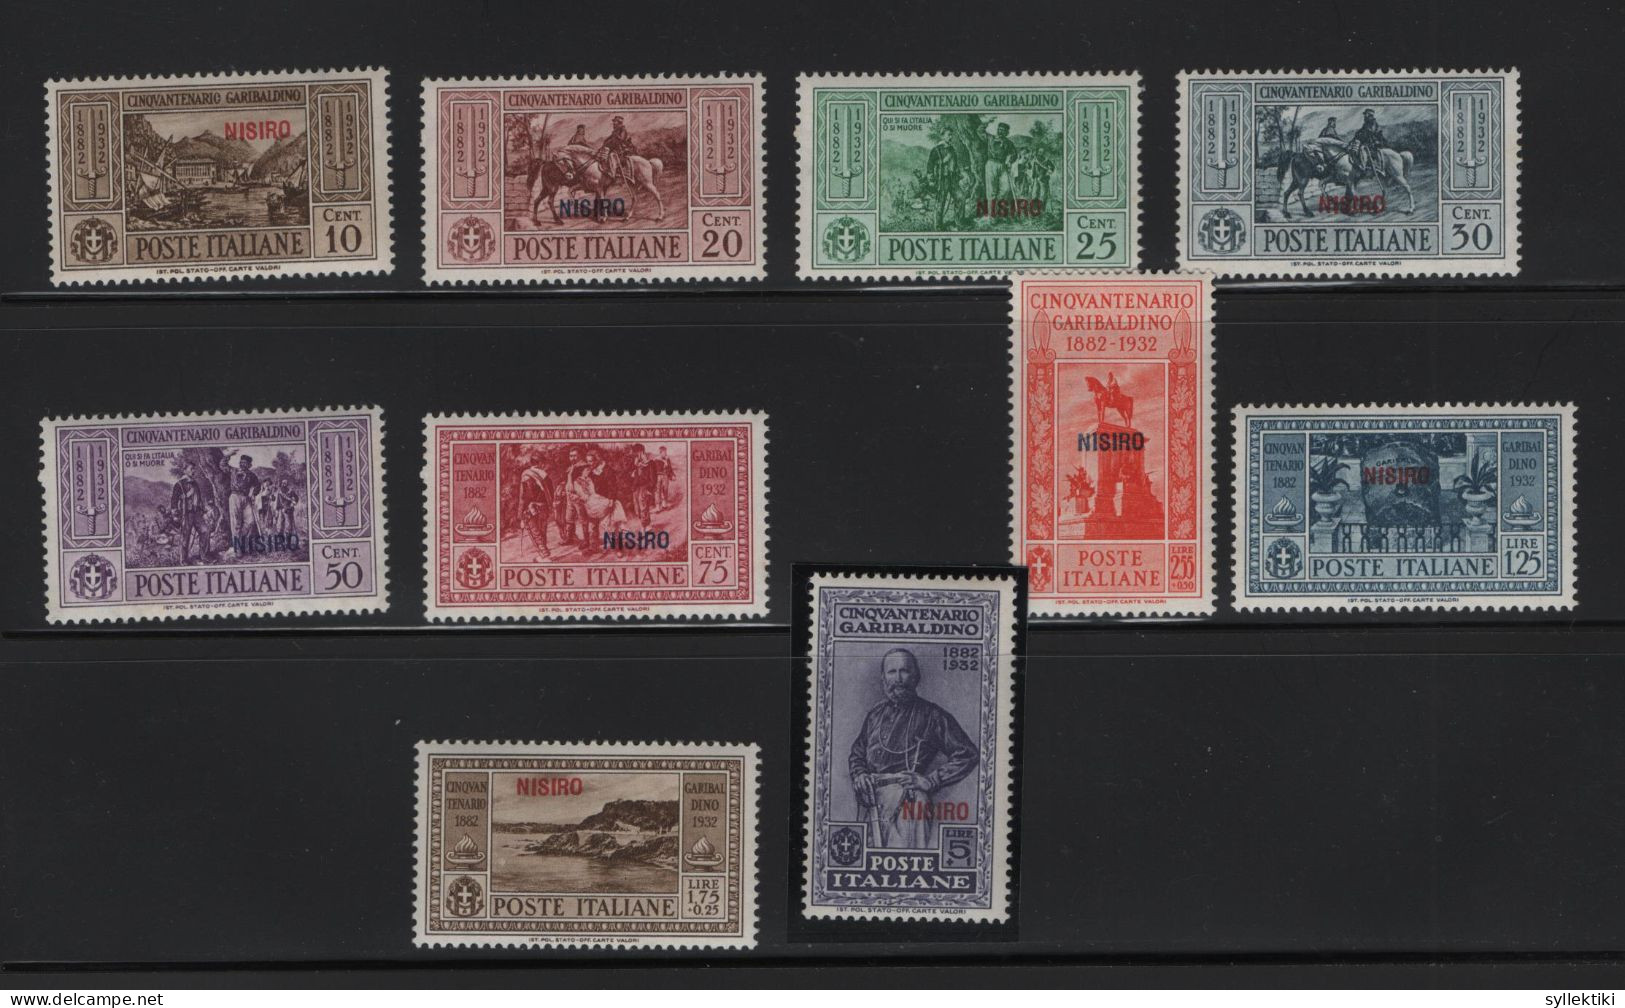 GREECE 1932 DODECANESE GARIBALDI ISSUE NISIRO OVERPRINT COMPLETE SET MNH STAMPS   HELLAS No 108X - 117X AND VALUE EURO - Dodekanisos